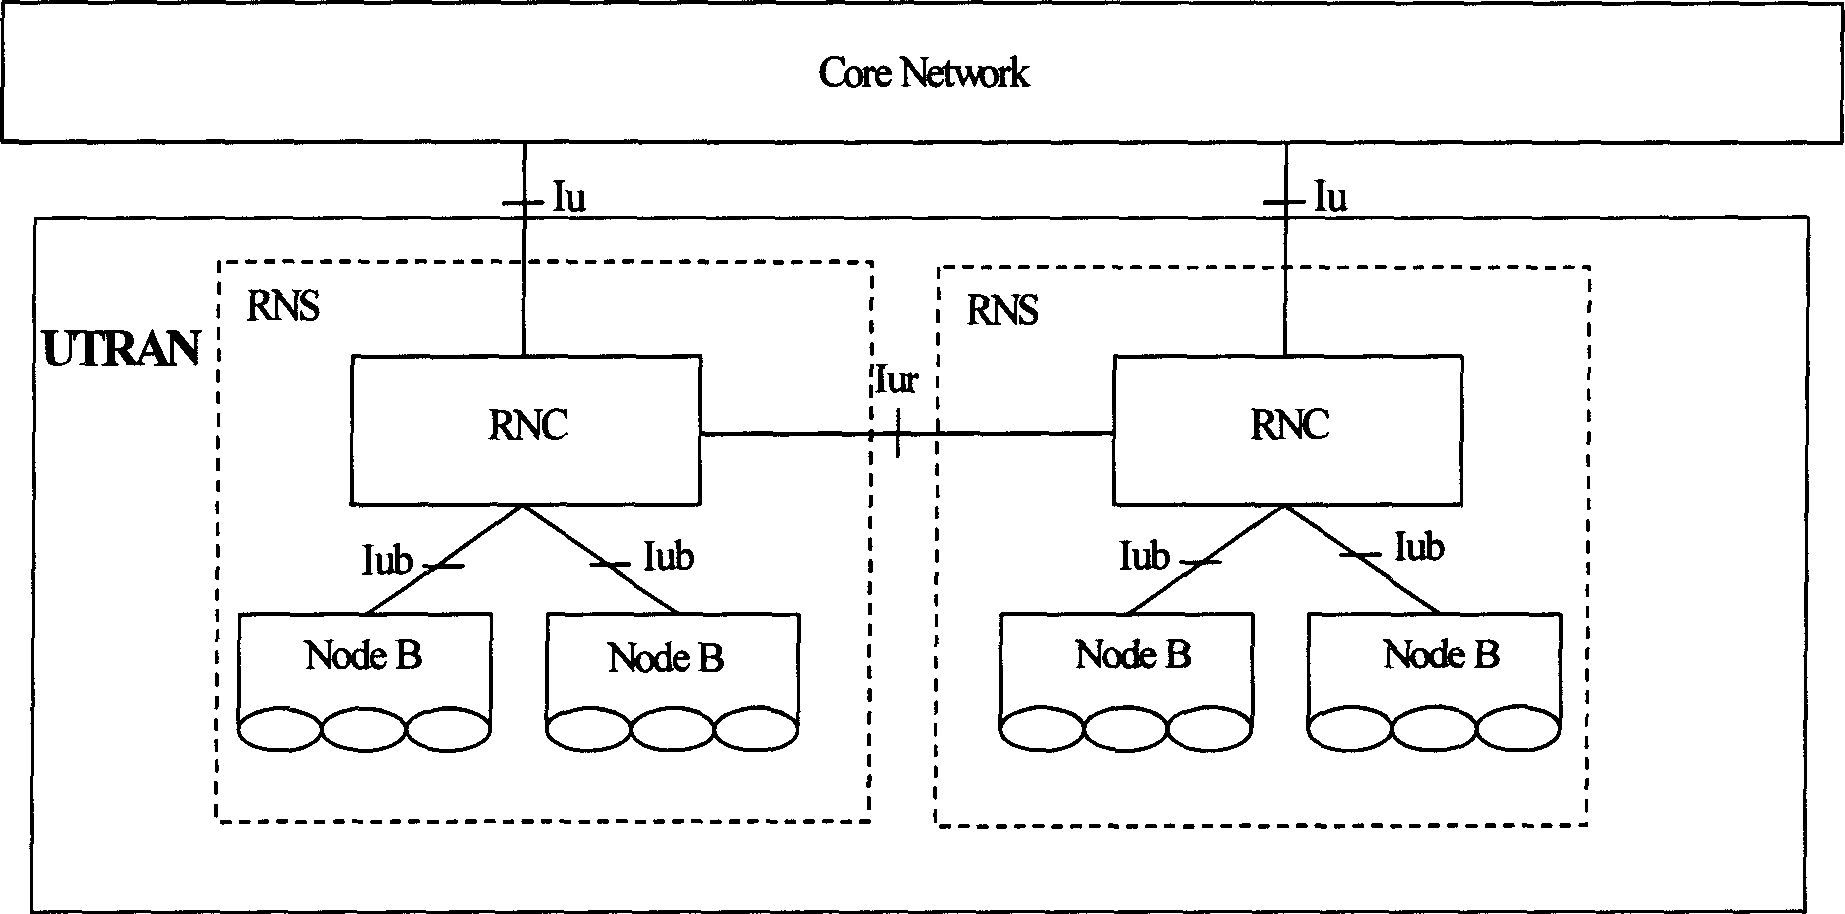 Reporting method for switching fault between systems